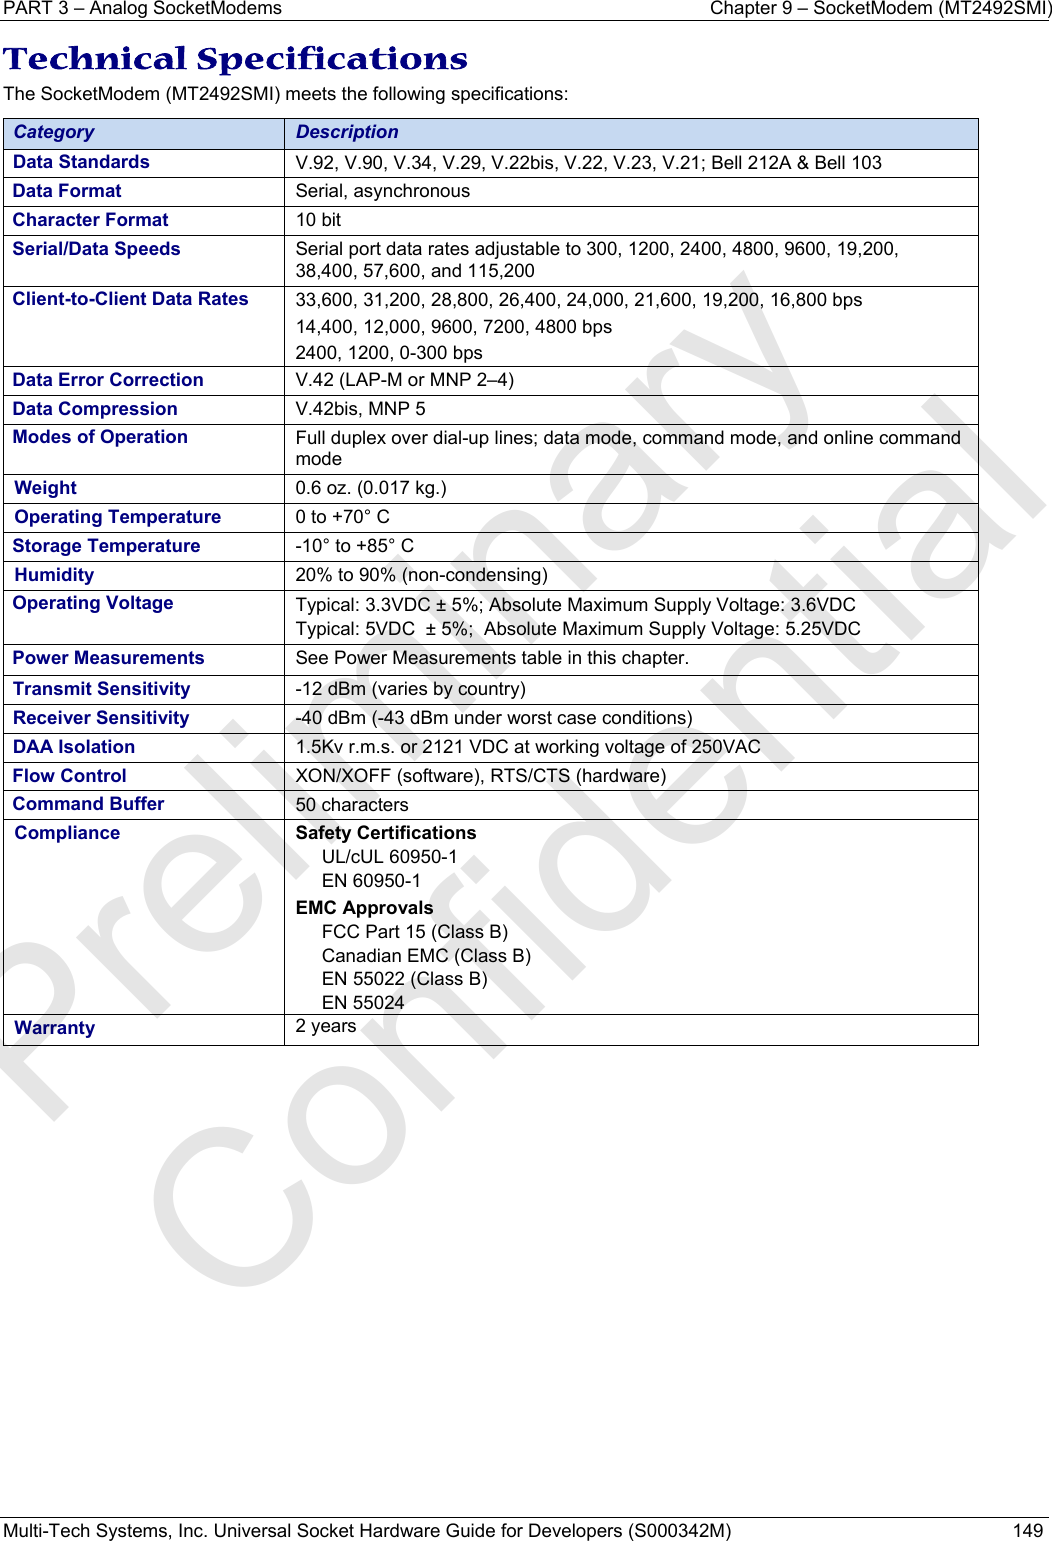 PART 3 – Analog SocketModems     Chapter 9 – SocketModem (MT2492SMI) Multi-Tech Systems, Inc. Universal Socket Hardware Guide for Developers (S000342M)  149  Technical Specifications The SocketModem (MT2492SMI) meets the following specifications:  Category  Description Data Standards  V.92, V.90, V.34, V.29, V.22bis, V.22, V.23, V.21; Bell 212A &amp; Bell 103  Data Format  Serial, asynchronous Character Format  10 bit Serial/Data Speeds   Serial port data rates adjustable to 300, 1200, 2400, 4800, 9600, 19,200, 38,400, 57,600, and 115,200 Client-to-Client Data Rates  33,600, 31,200, 28,800, 26,400, 24,000, 21,600, 19,200, 16,800 bps 14,400, 12,000, 9600, 7200, 4800 bps 2400, 1200, 0-300 bps Data Error Correction  V.42 (LAP-M or MNP 2–4) Data Compression  V.42bis, MNP 5 Modes of Operation  Full duplex over dial-up lines; data mode, command mode, and online command mode Weight  0.6 oz. (0.017 kg.)  Operating Temperature   0 to +70° C   Storage Temperature  -10° to +85° C Humidity  20% to 90% (non-condensing)   Operating Voltage  Typical: 3.3VDC ± 5%; Absolute Maximum Supply Voltage: 3.6VDC Typical: 5VDC  ± 5%;  Absolute Maximum Supply Voltage: 5.25VDC Power Measurements   See Power Measurements table in this chapter. Transmit Sensitivity  -12 dBm (varies by country) Receiver Sensitivity  -40 dBm (-43 dBm under worst case conditions) DAA Isolation  1.5Kv r.m.s. or 2121 VDC at working voltage of 250VAC Flow Control  XON/XOFF (software), RTS/CTS (hardware) Command Buffer  50 characters Compliance  Safety Certifications UL/cUL 60950-1 EN 60950-1 EMC Approvals FCC Part 15 (Class B) Canadian EMC (Class B) EN 55022 (Class B) EN 55024 Warranty  2 years   Preliminary  Confidential